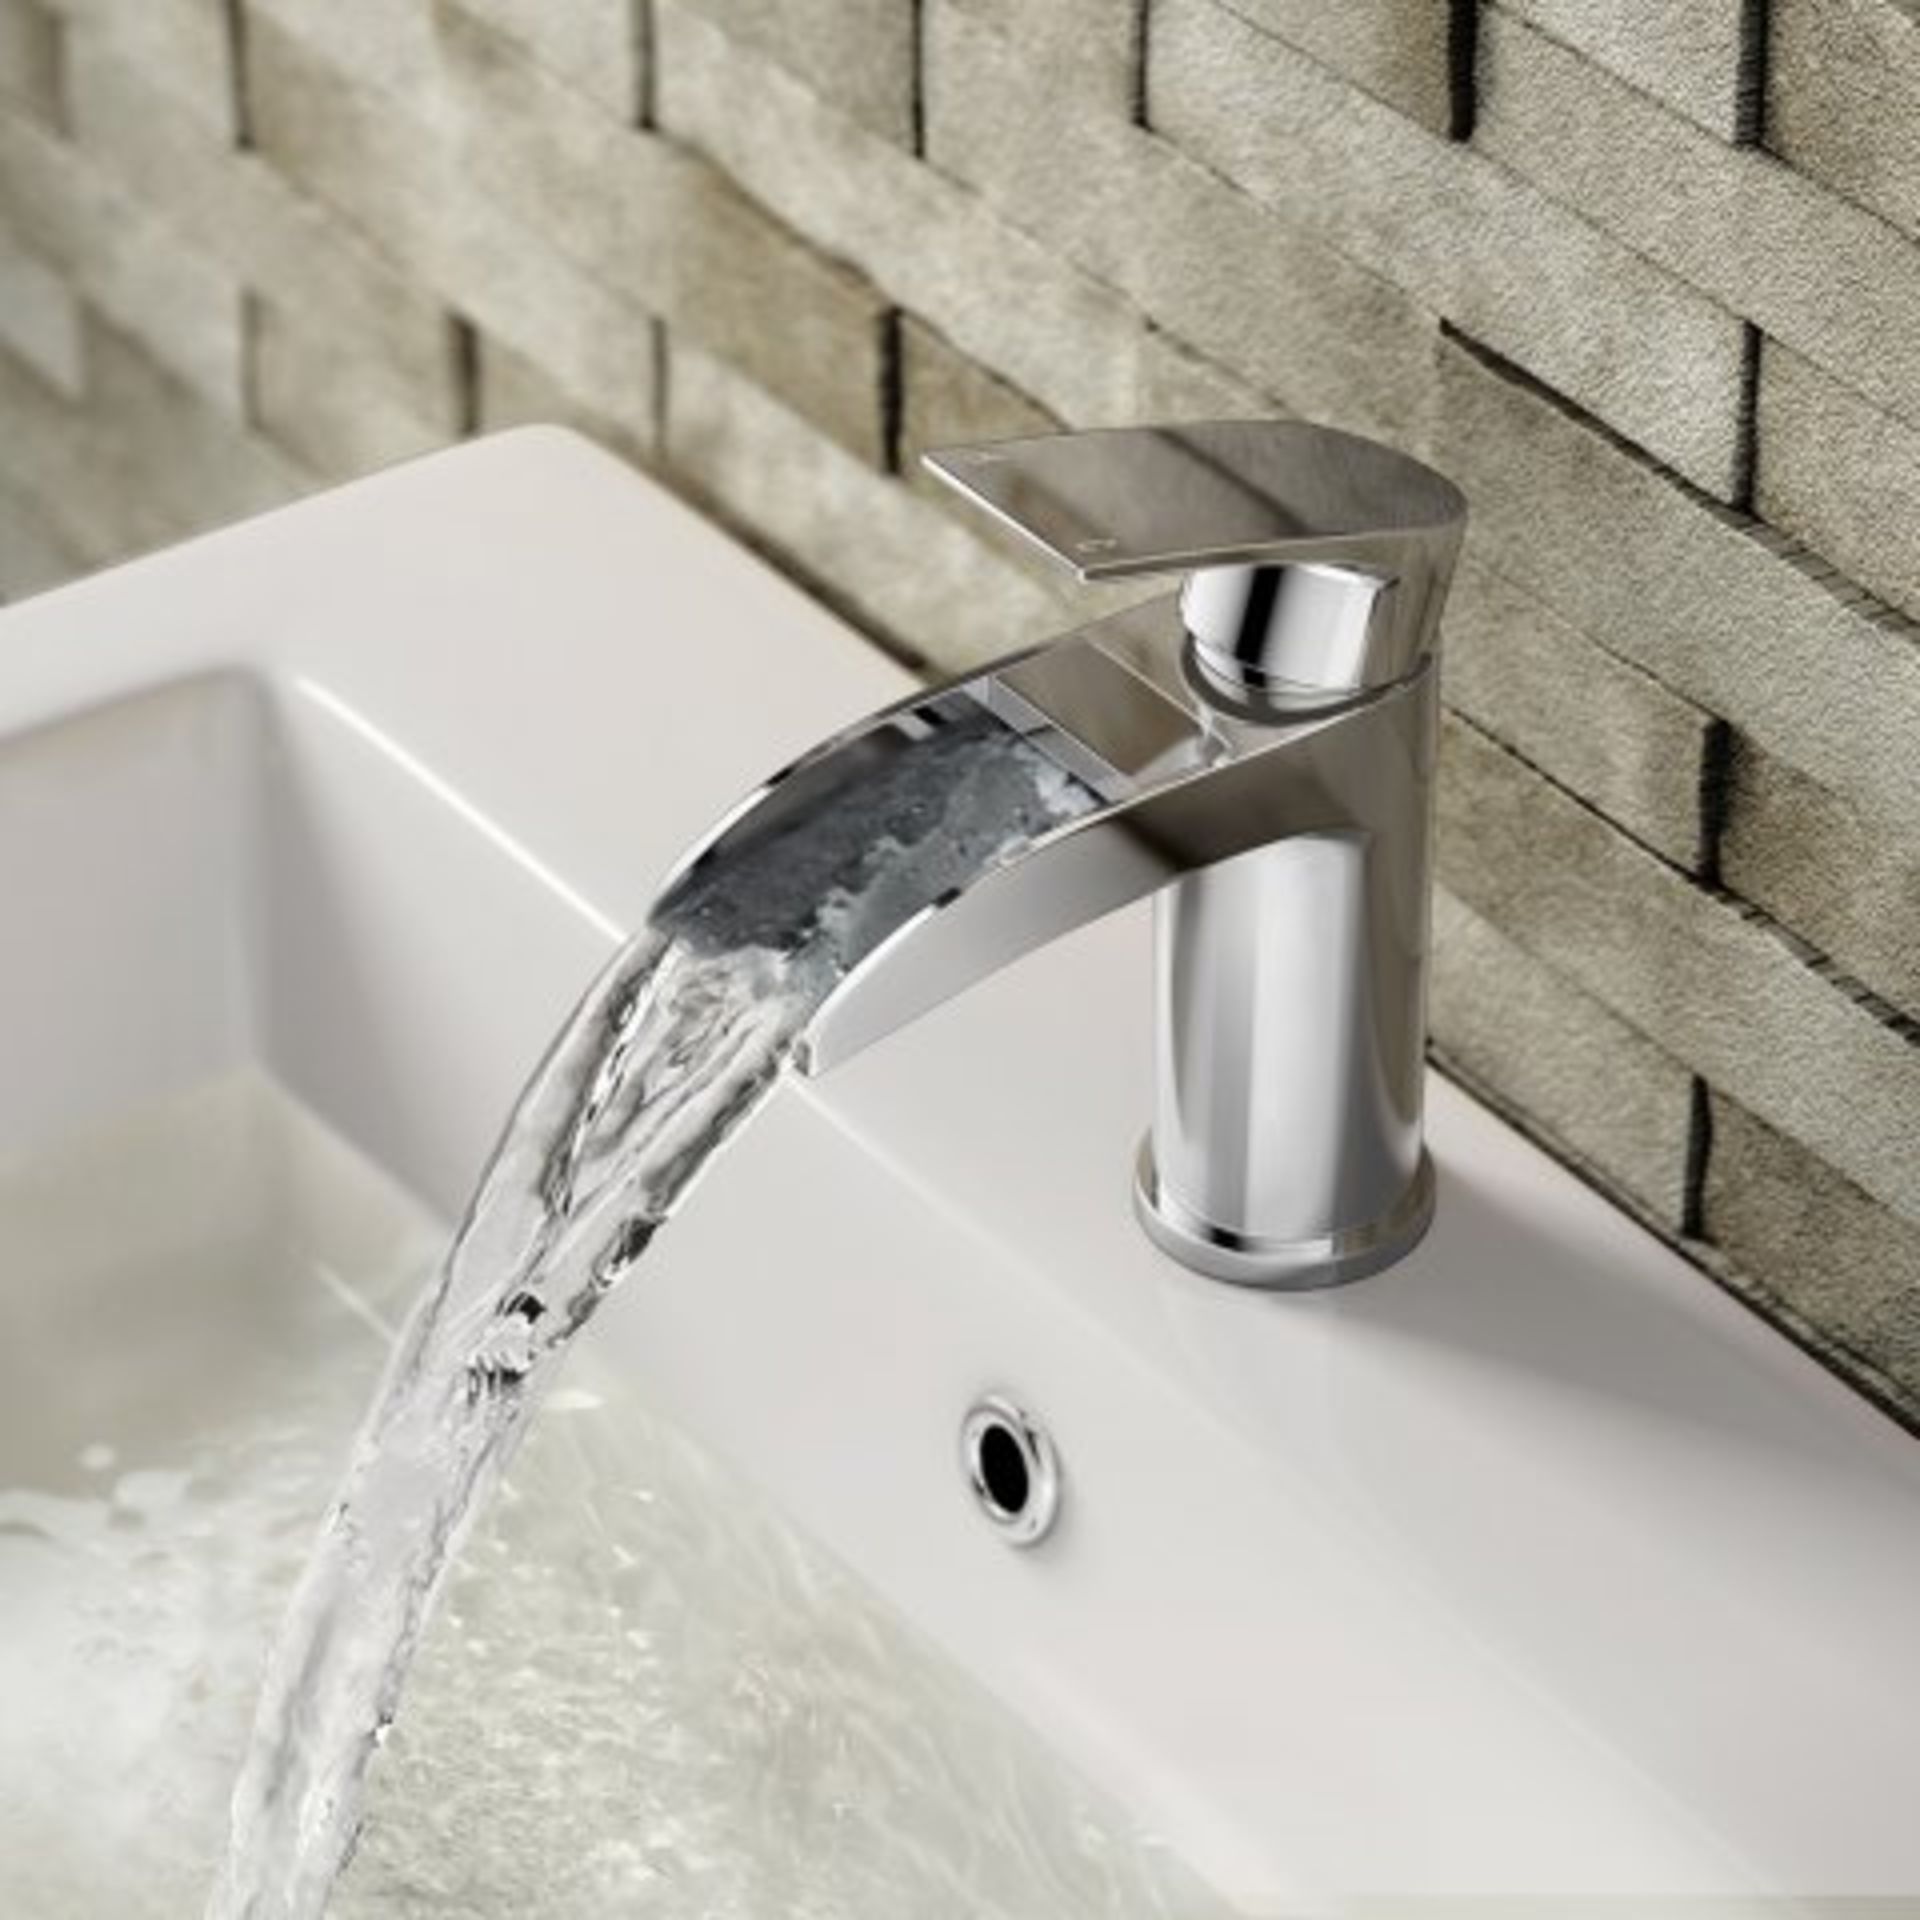 (H41) Avis II Waterfall Basin Mixer Tap Waterfall Feature Our range of waterfall taps add a touch of - Bild 2 aus 3